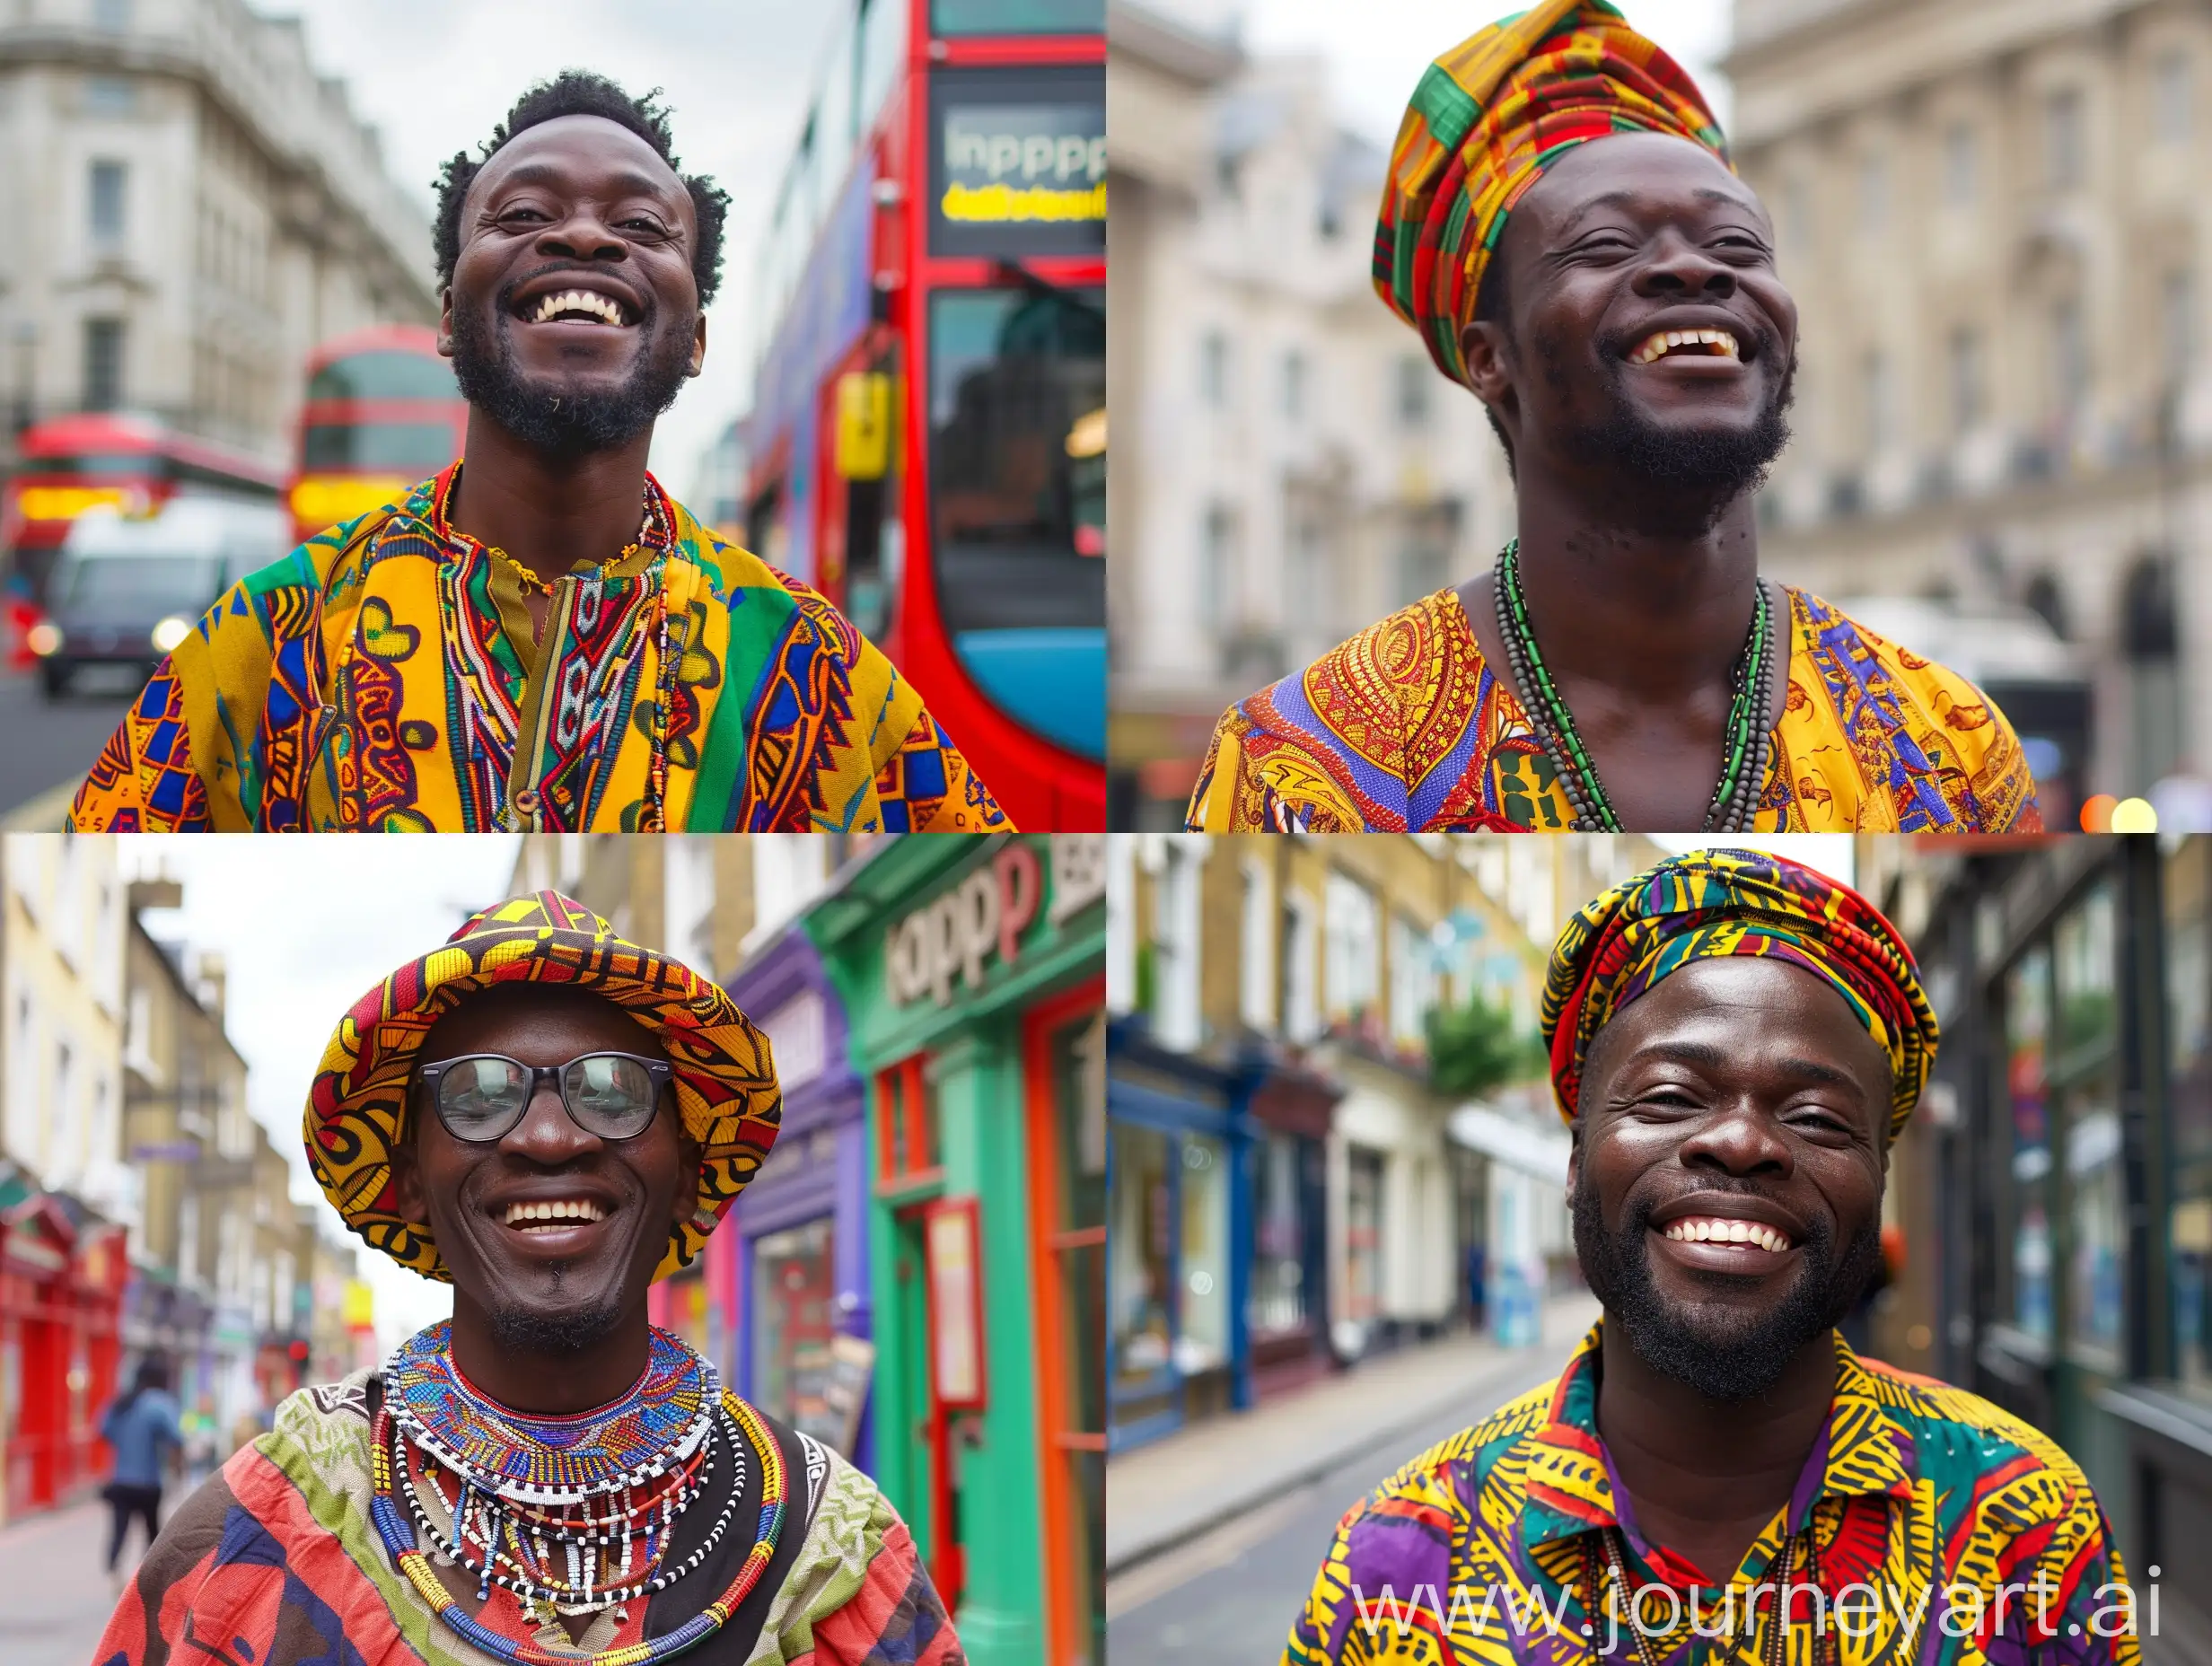 Happy african in london

